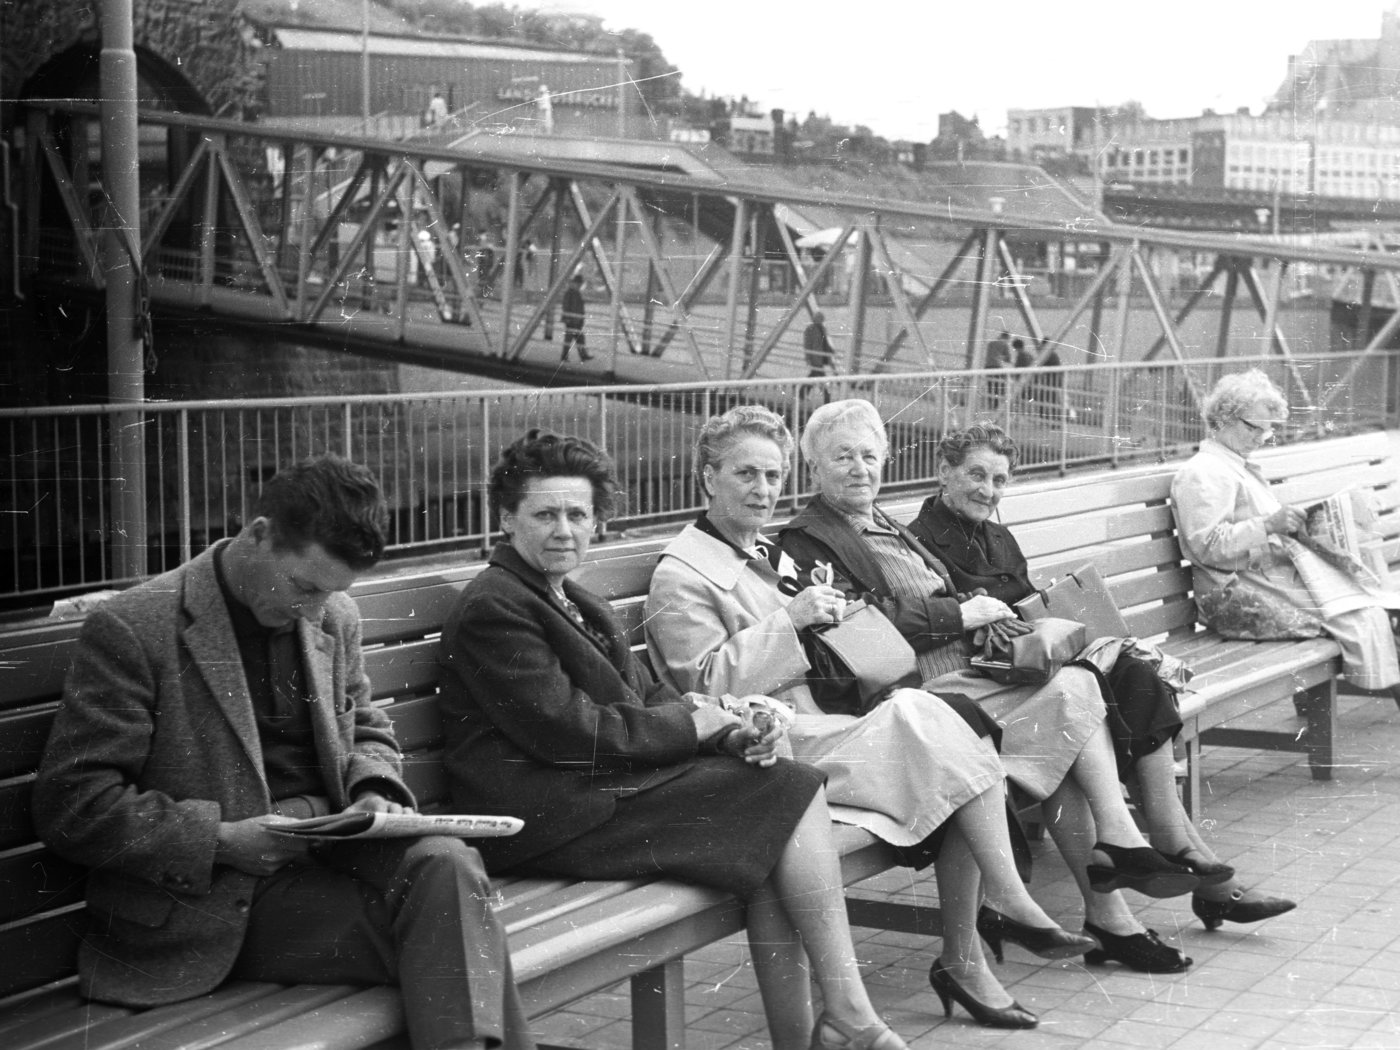 A black and white photograph of St. Pauli-Landungsbrücken, Hamburg, 1965, featuring several older ladies and one younger man, all sitting on benches